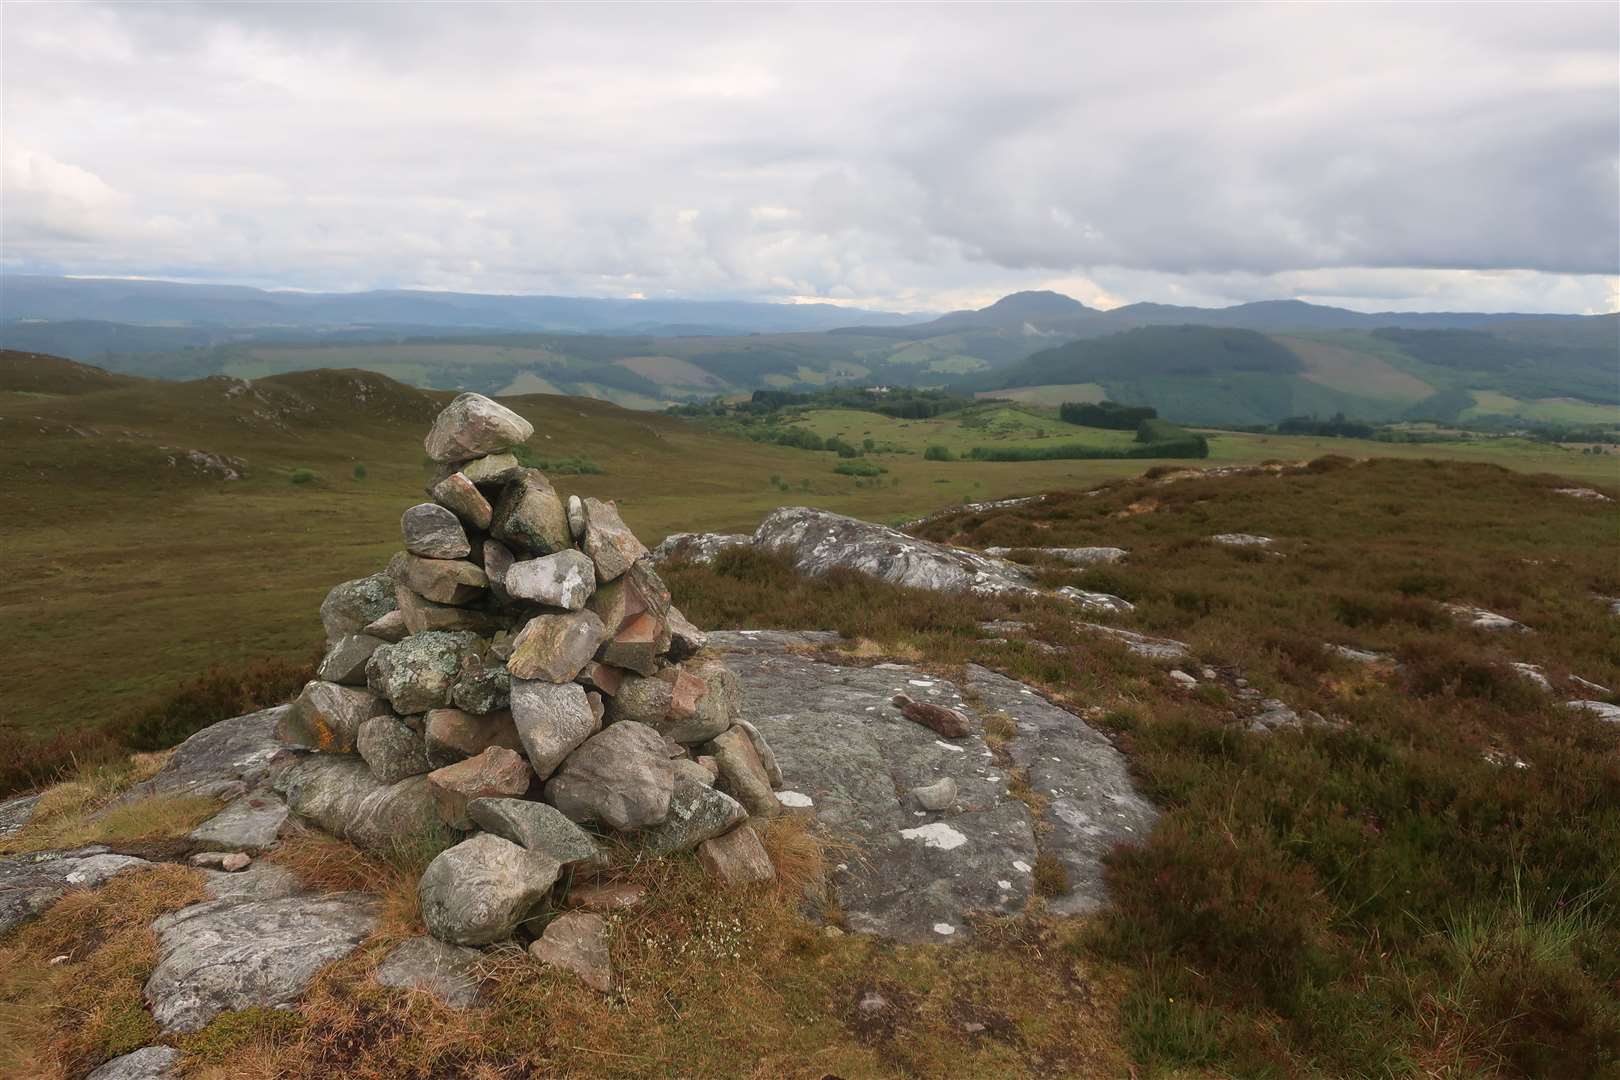 Looking south to Meall Fuar-mhonaidh from the viewpoint.